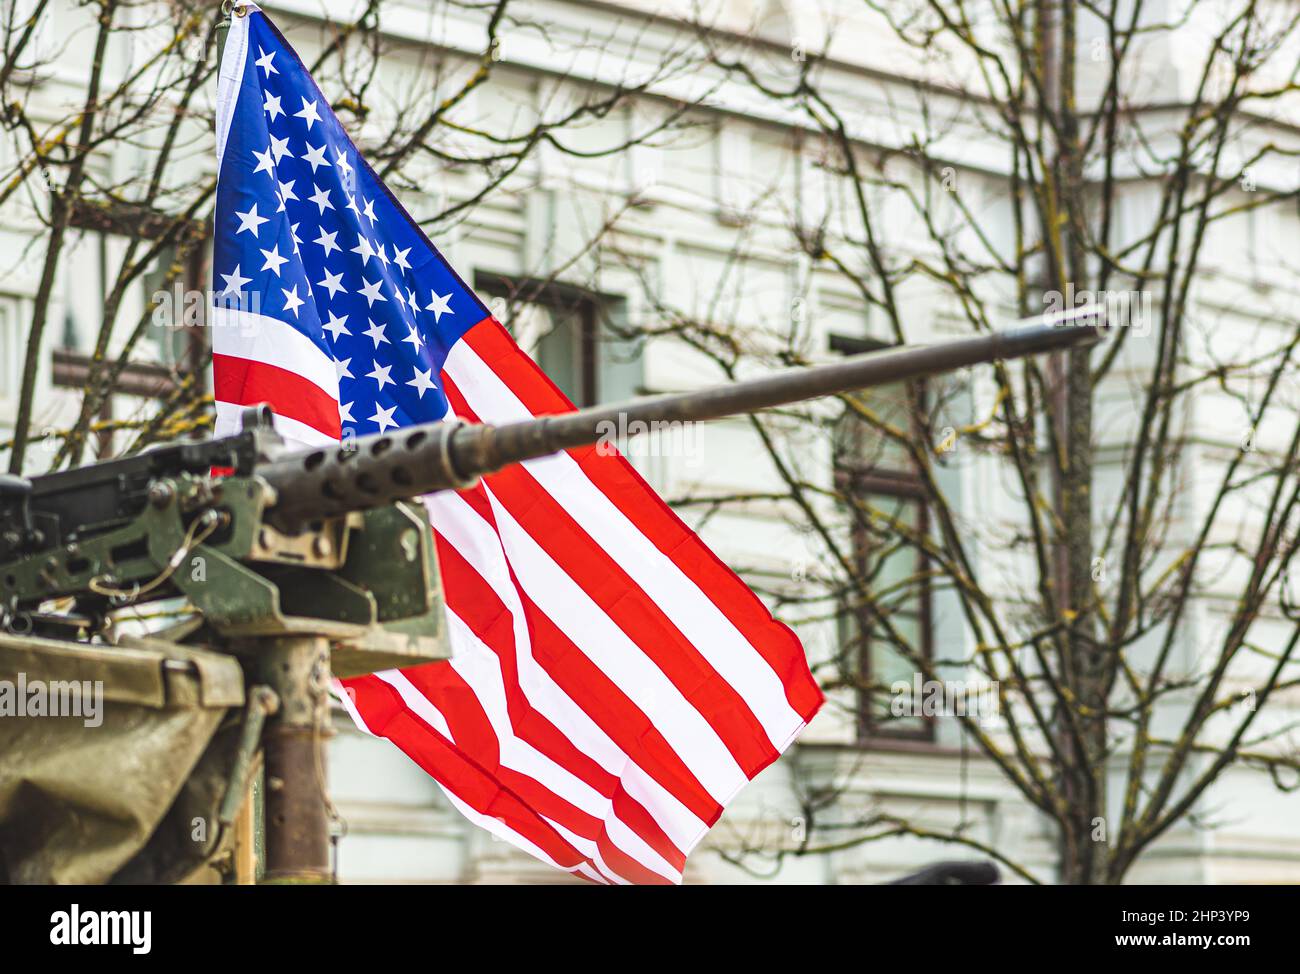 Machine gun mounted on United States Marine Corps forces tank or military vehicle, USA or US army, with American flag waiving on background Stock Photo